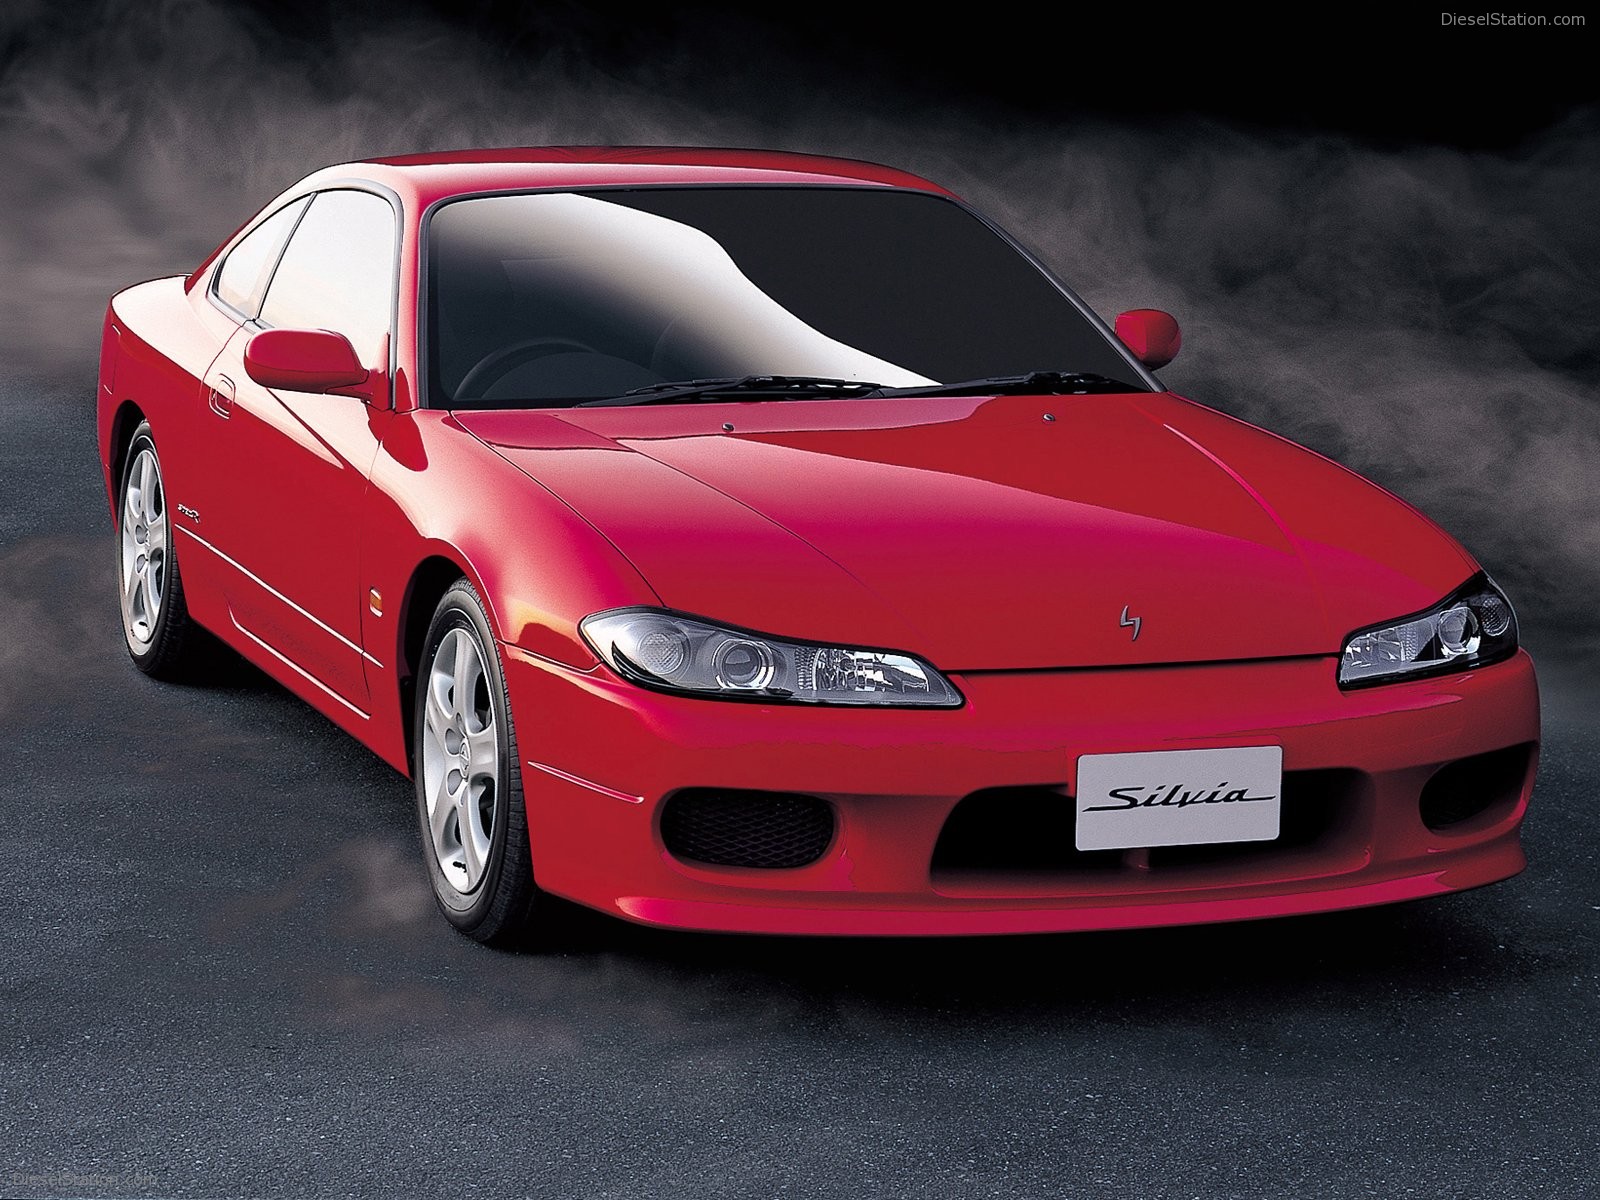 S15 Wallpaper For Desktop And Mobile Devices Nissan Silvia